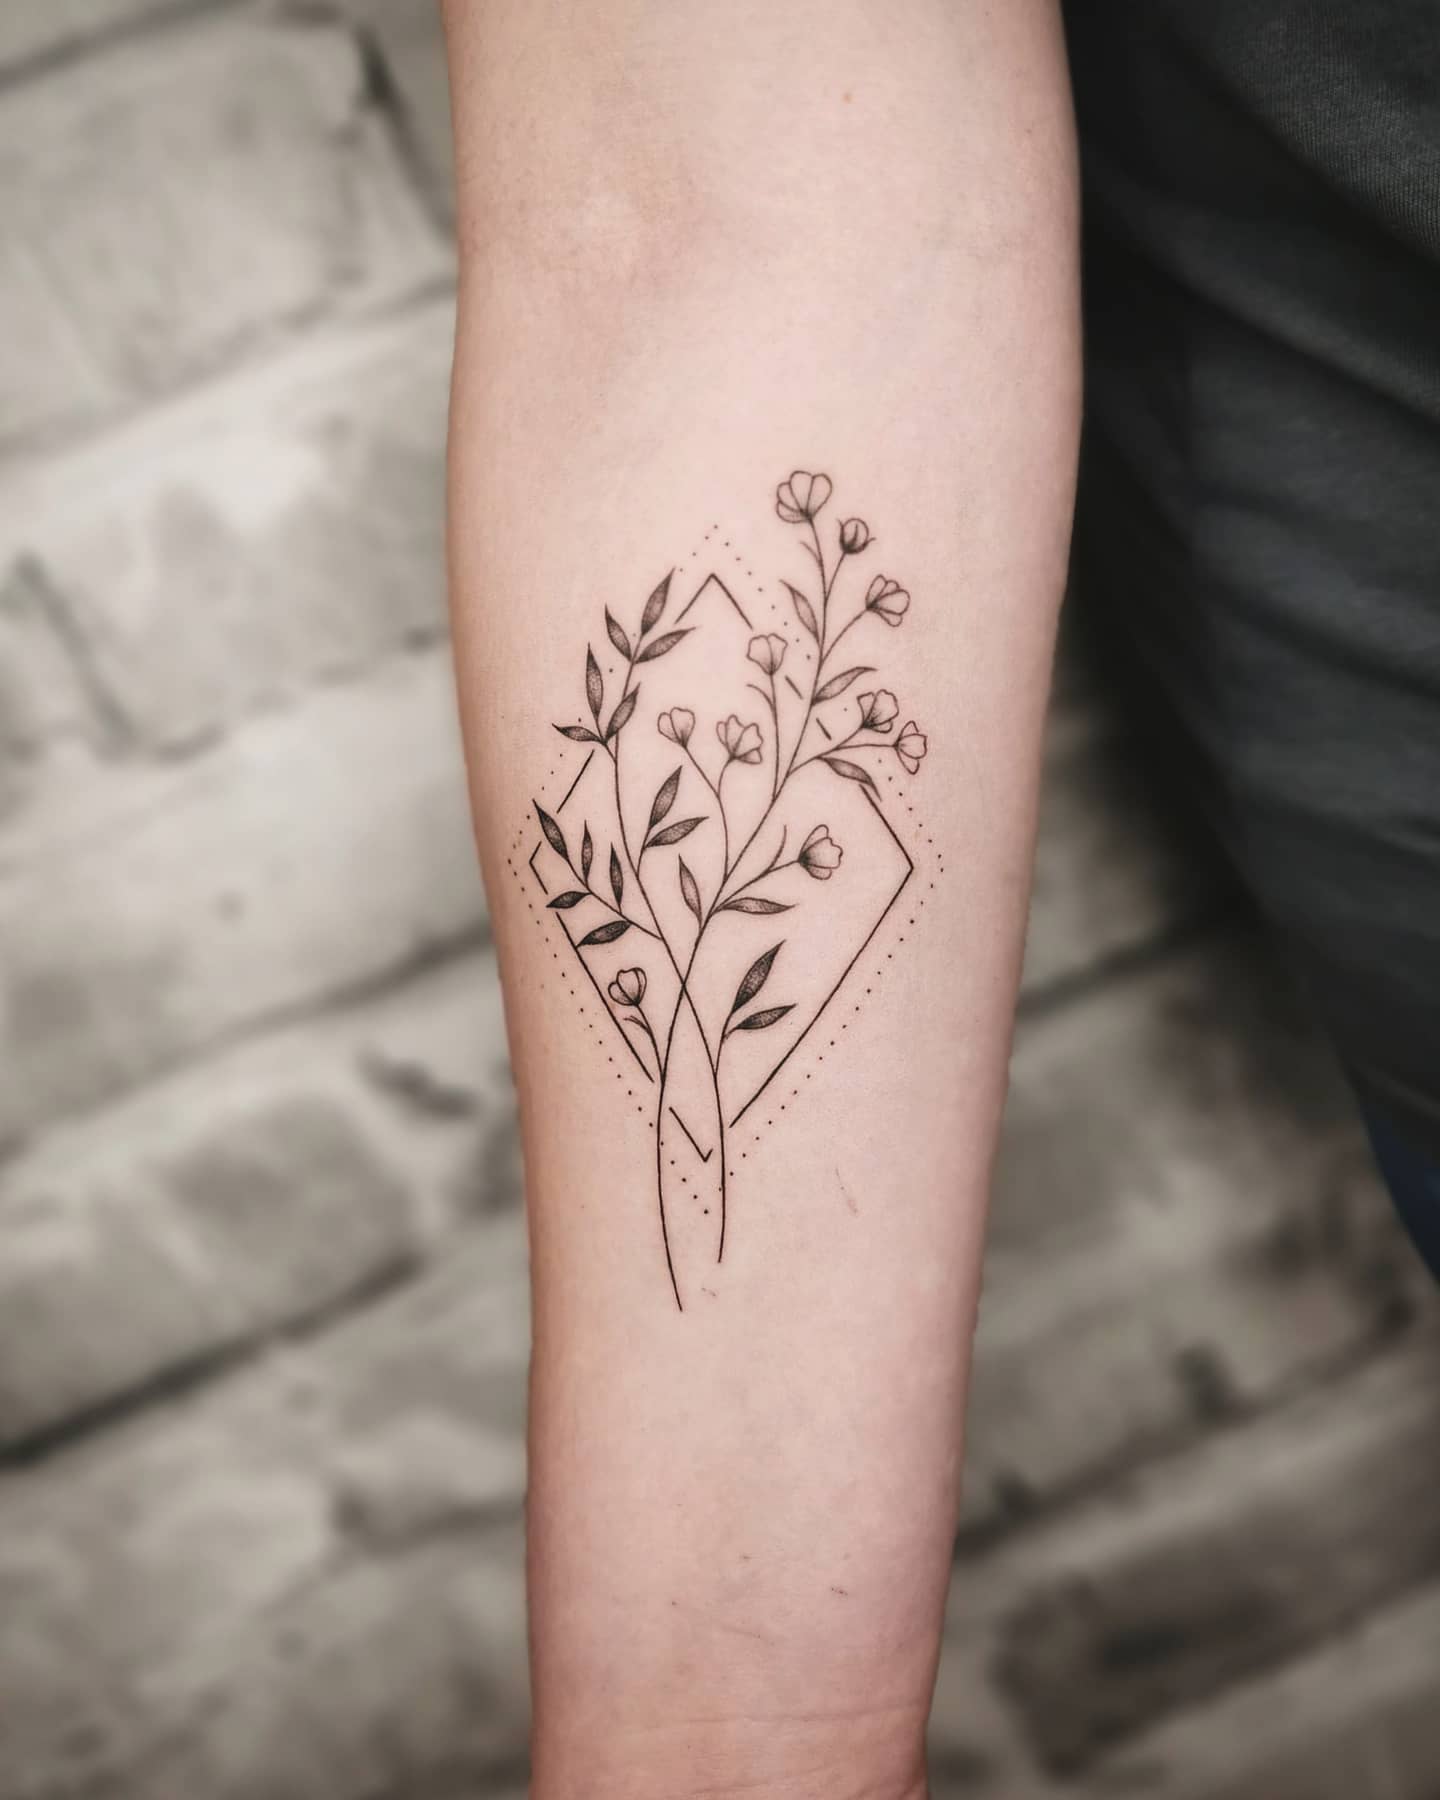 Baby’s Breath tattoo meaning